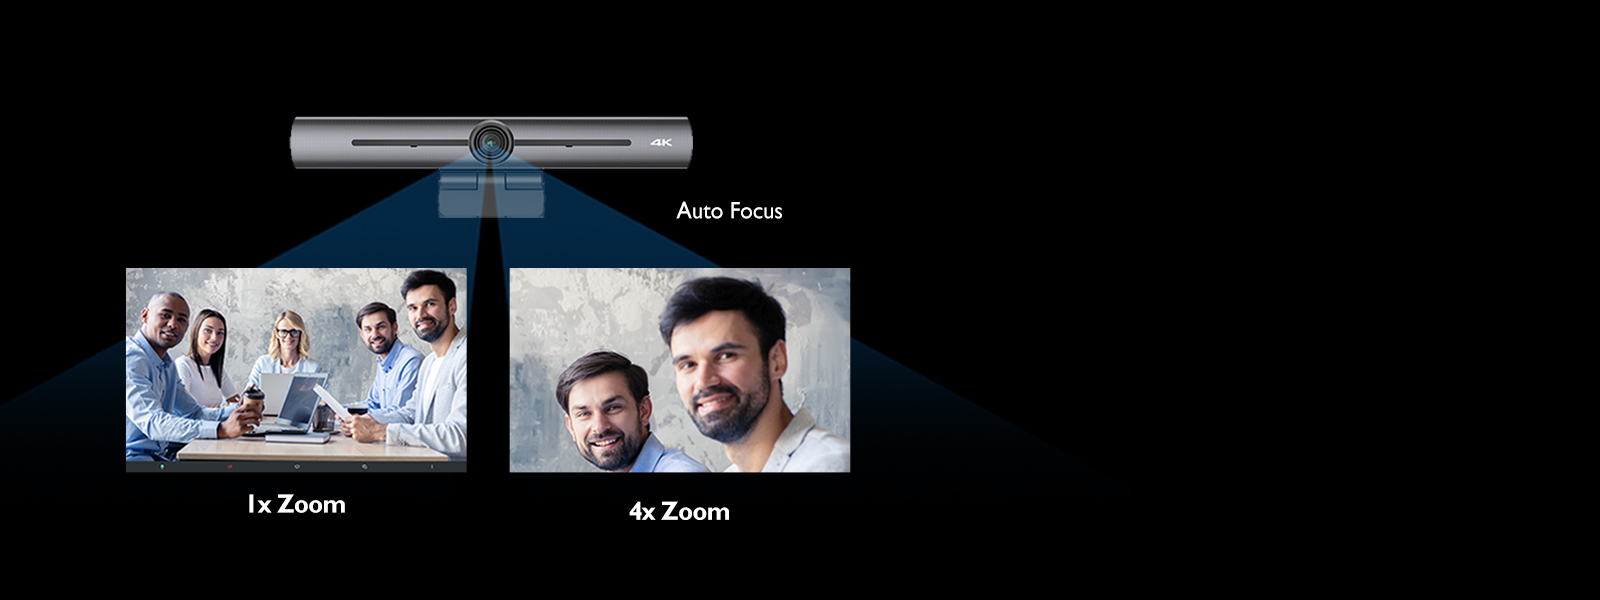 DVY22 features 4x digital zoom to highlight speakers with auto focus.